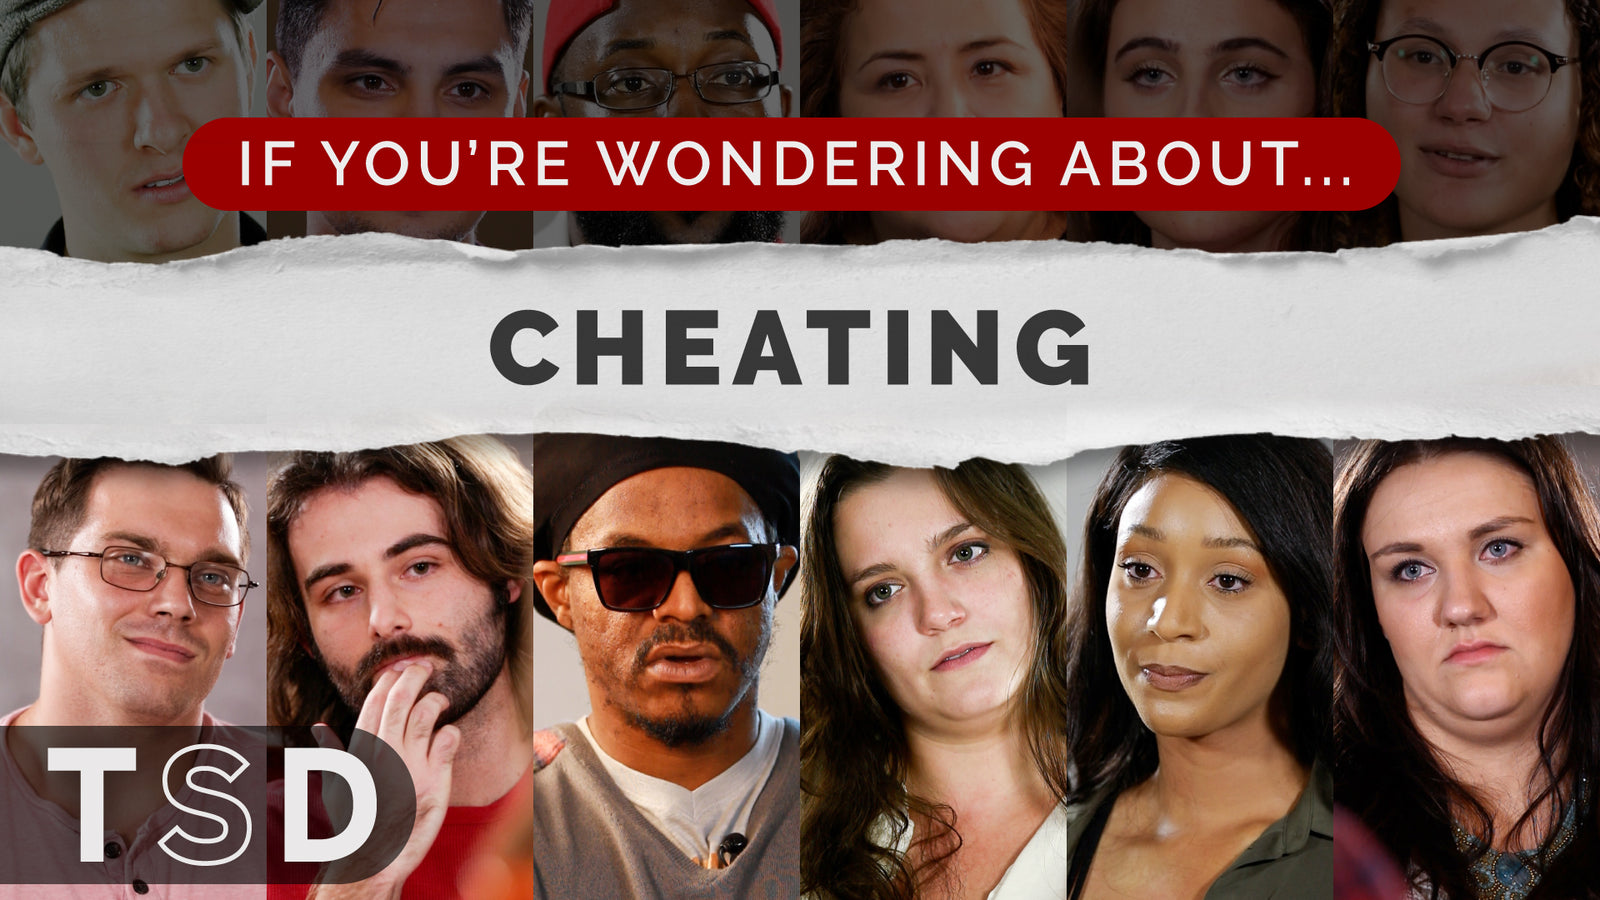 If You're Wondering About... Cheating